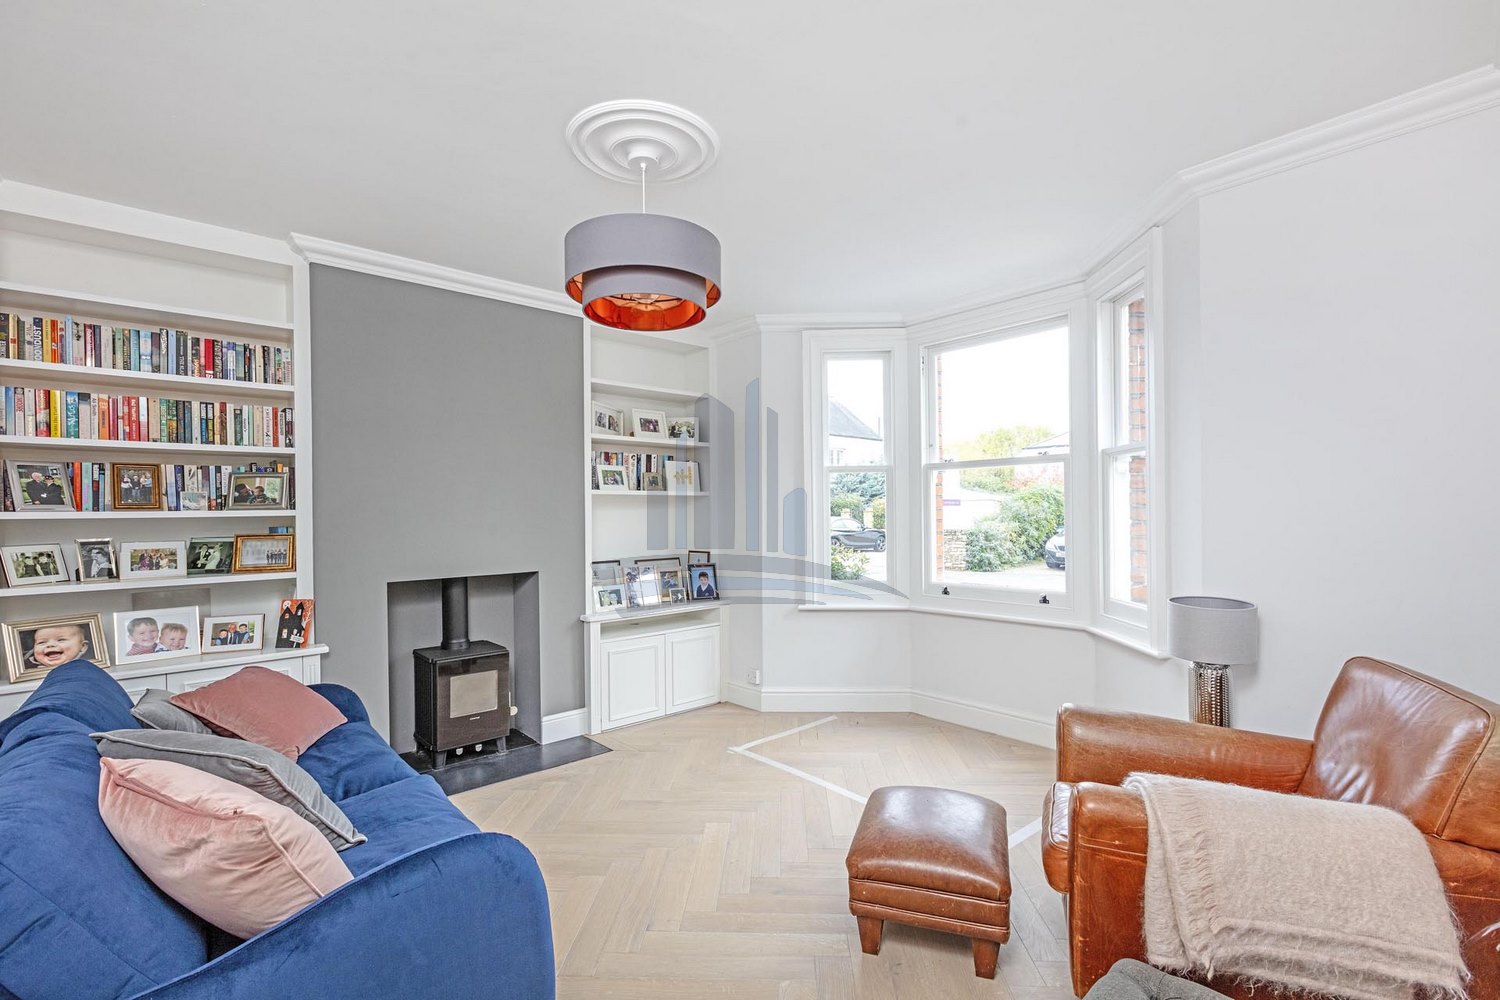 house interior in white and gray colours and with books on shelves after renovation by loft conversion company london